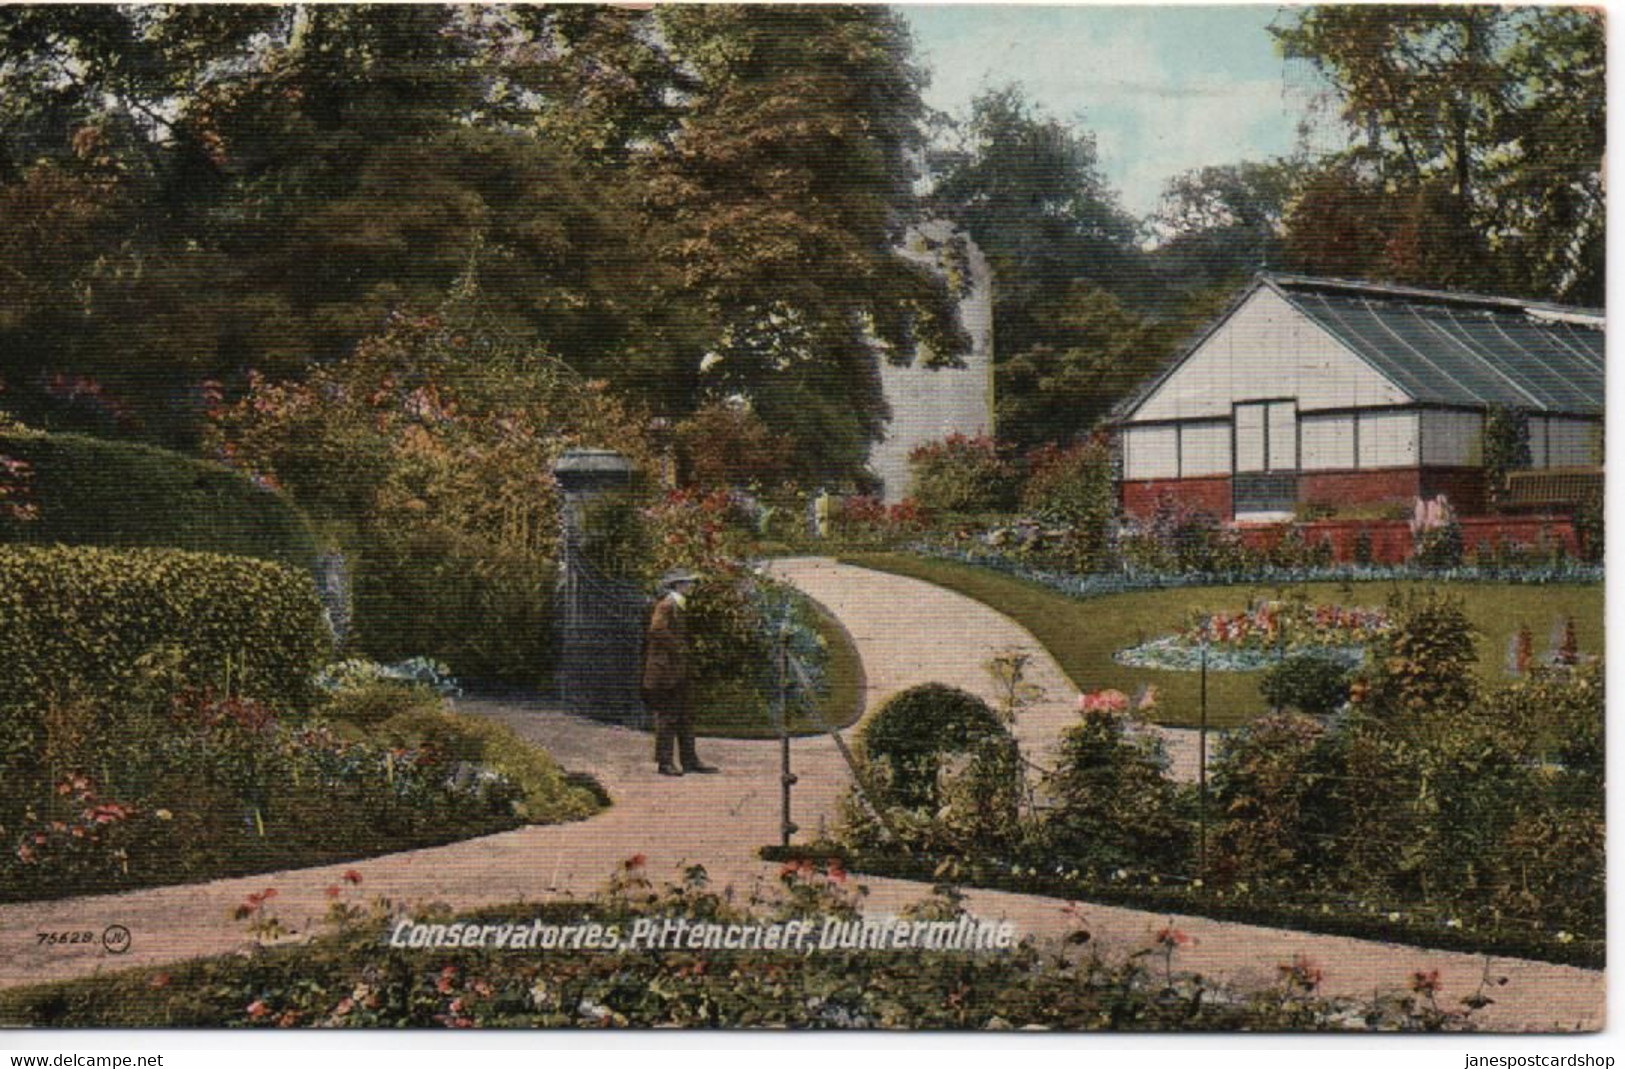 CONSERVATORIES - PITTENCRIEFF - DUNFERMLINE - FIFE - PUBLISHED BY VALENTINES - POSTALLY USED 1925 - Fife